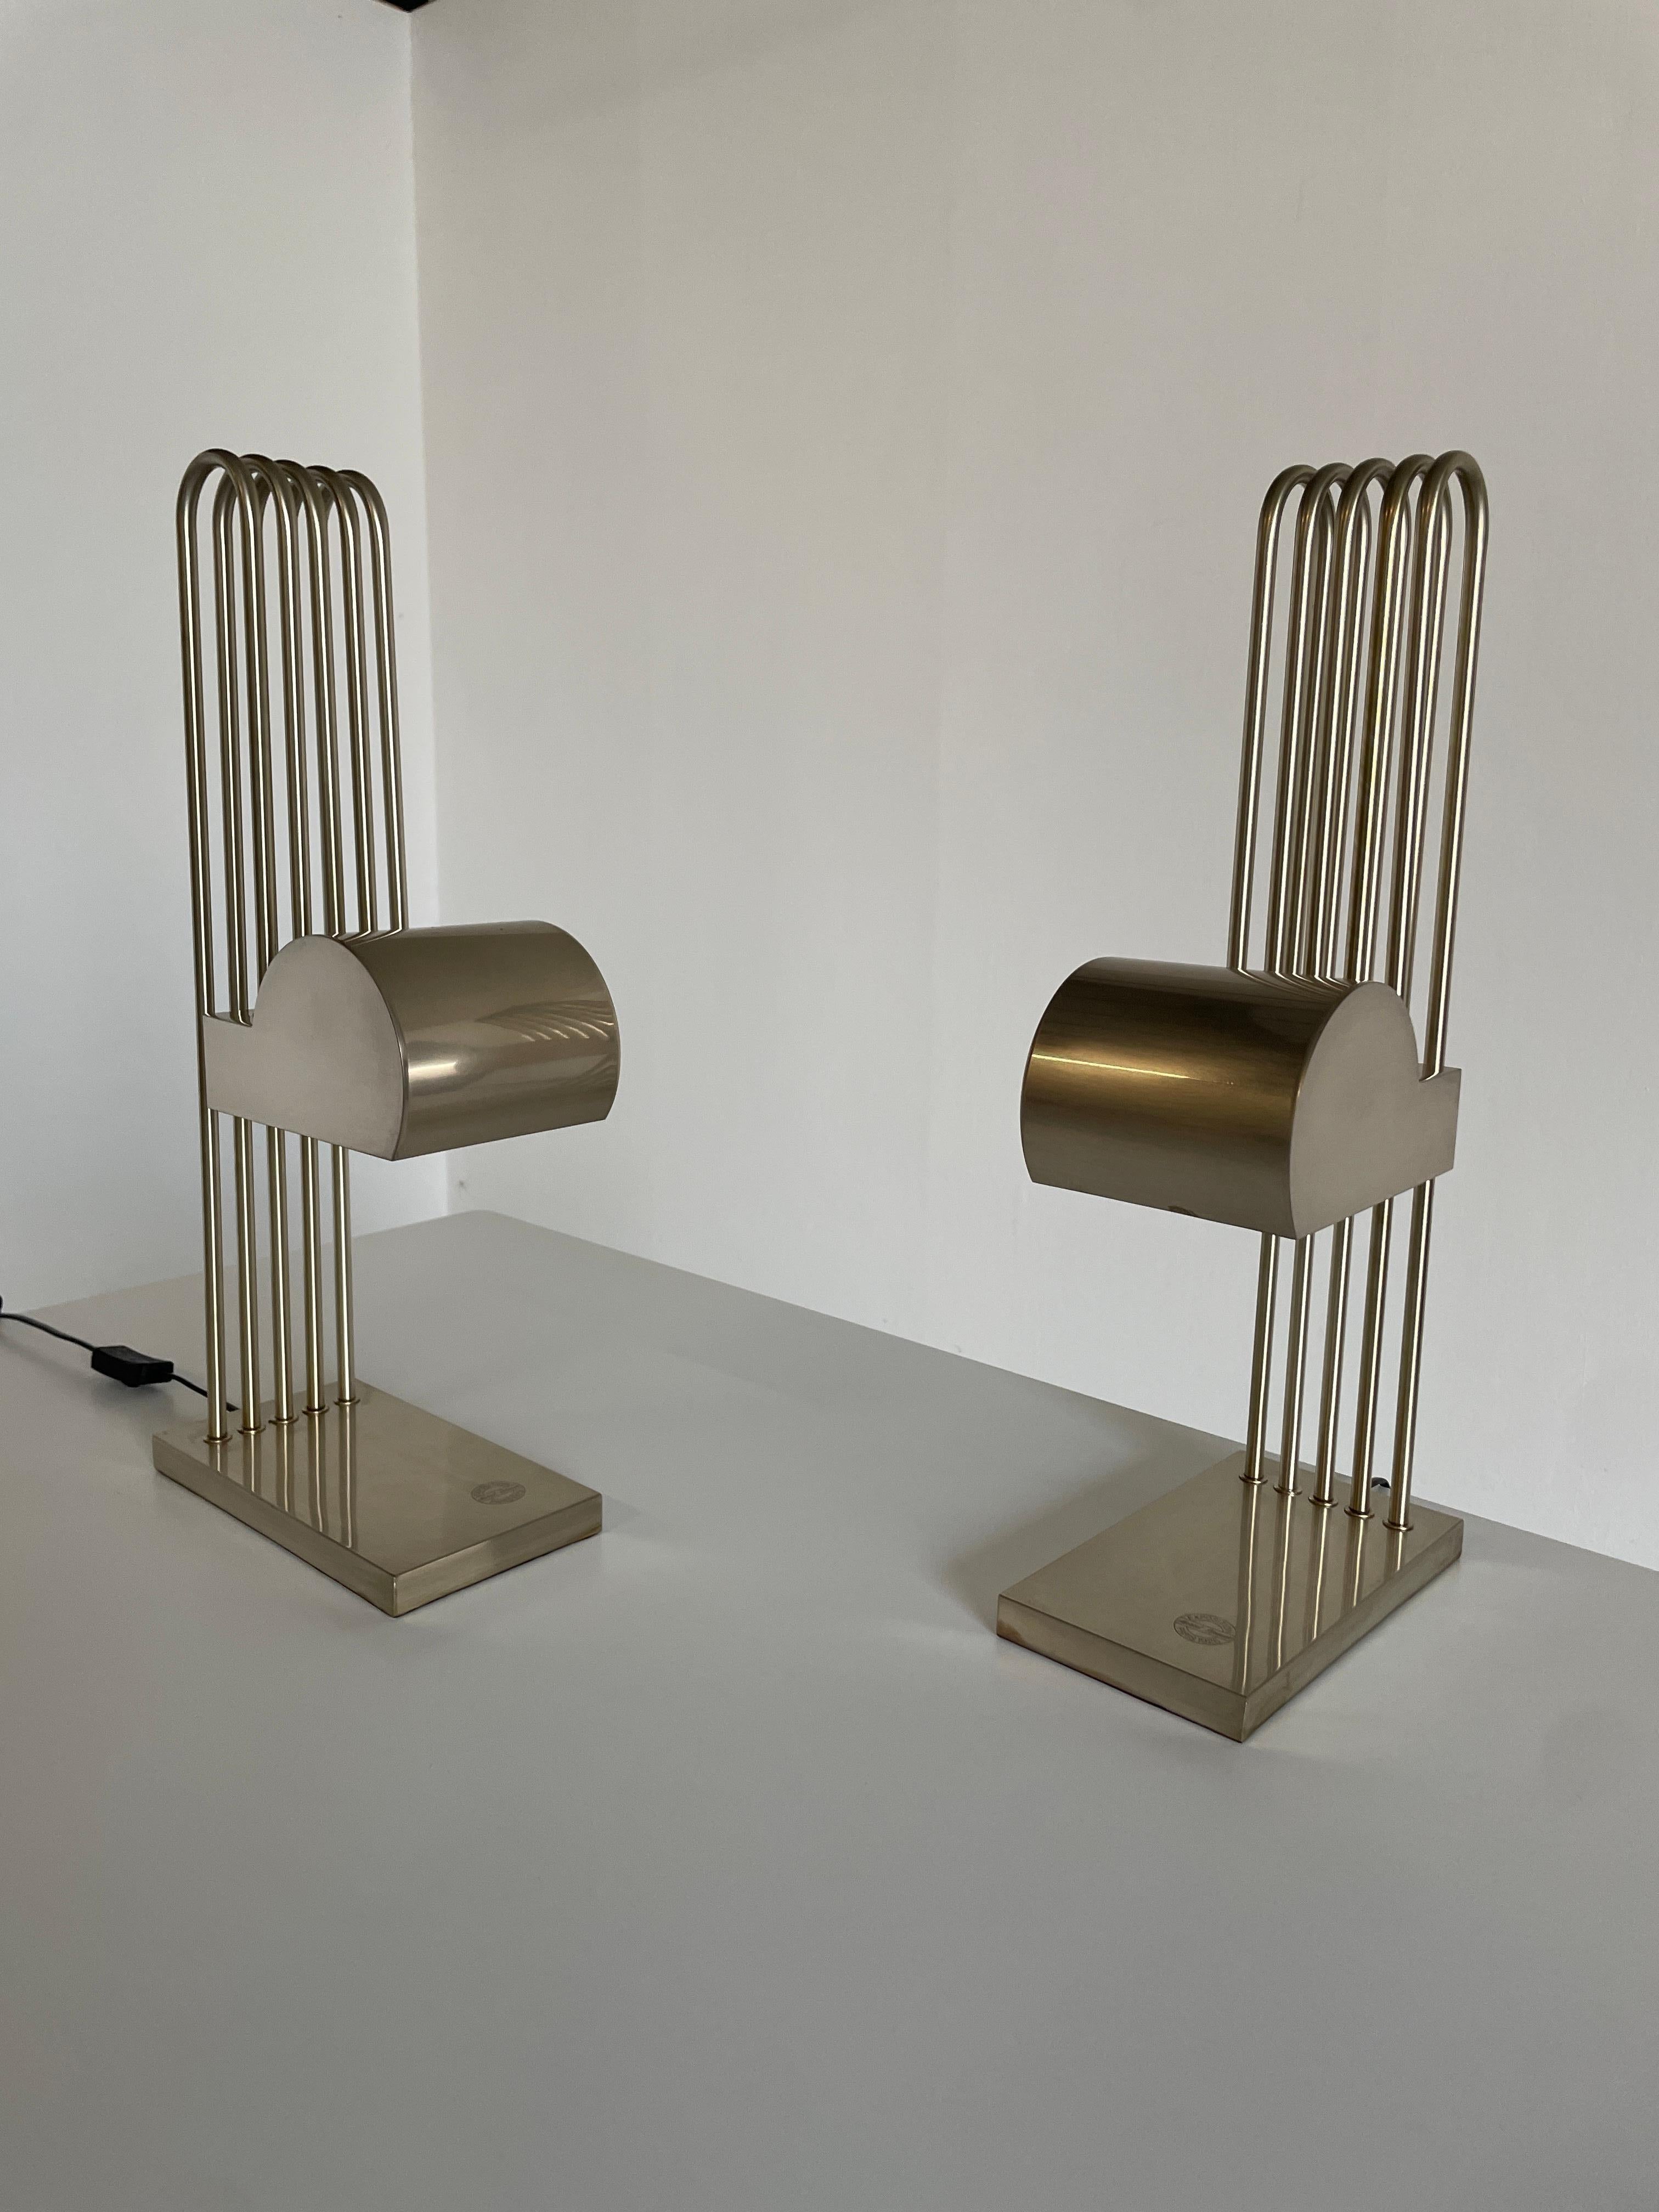 French Pair of Marcel Breuer Bauhaus Table Lamps for the Paris Exhibition 1925, France